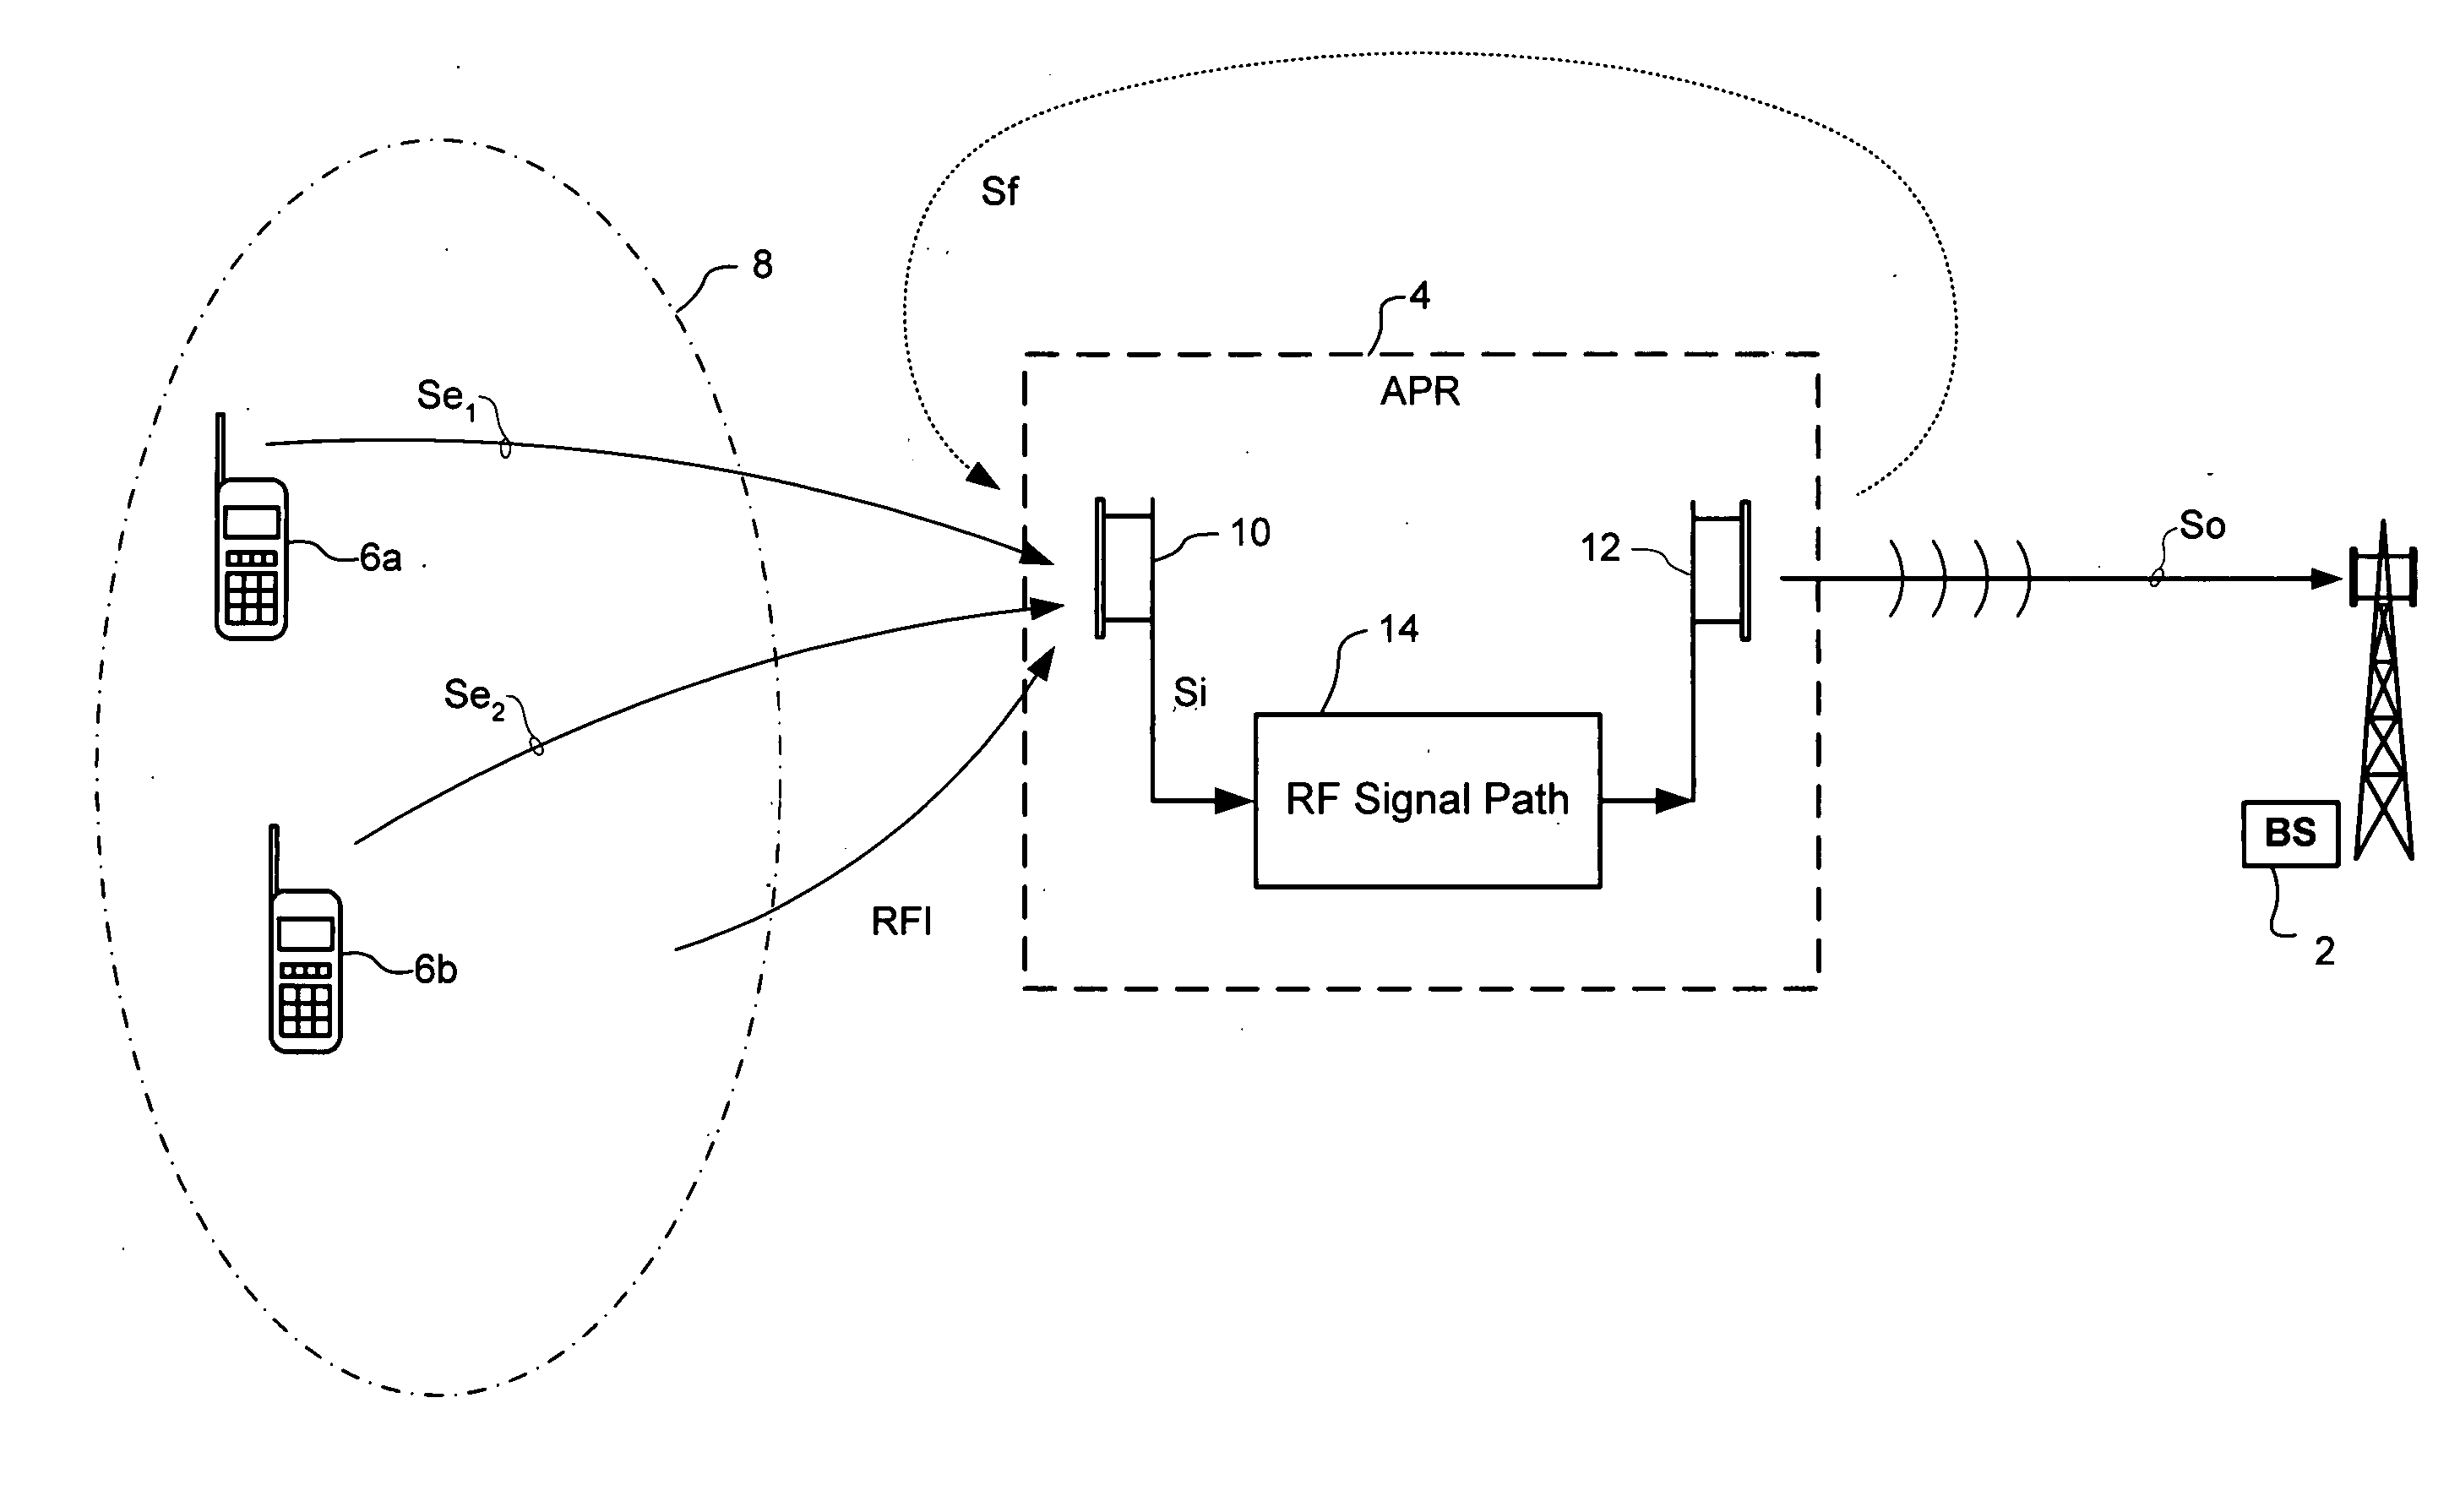 Method for detecting an oscillation in an on-frequency repeater